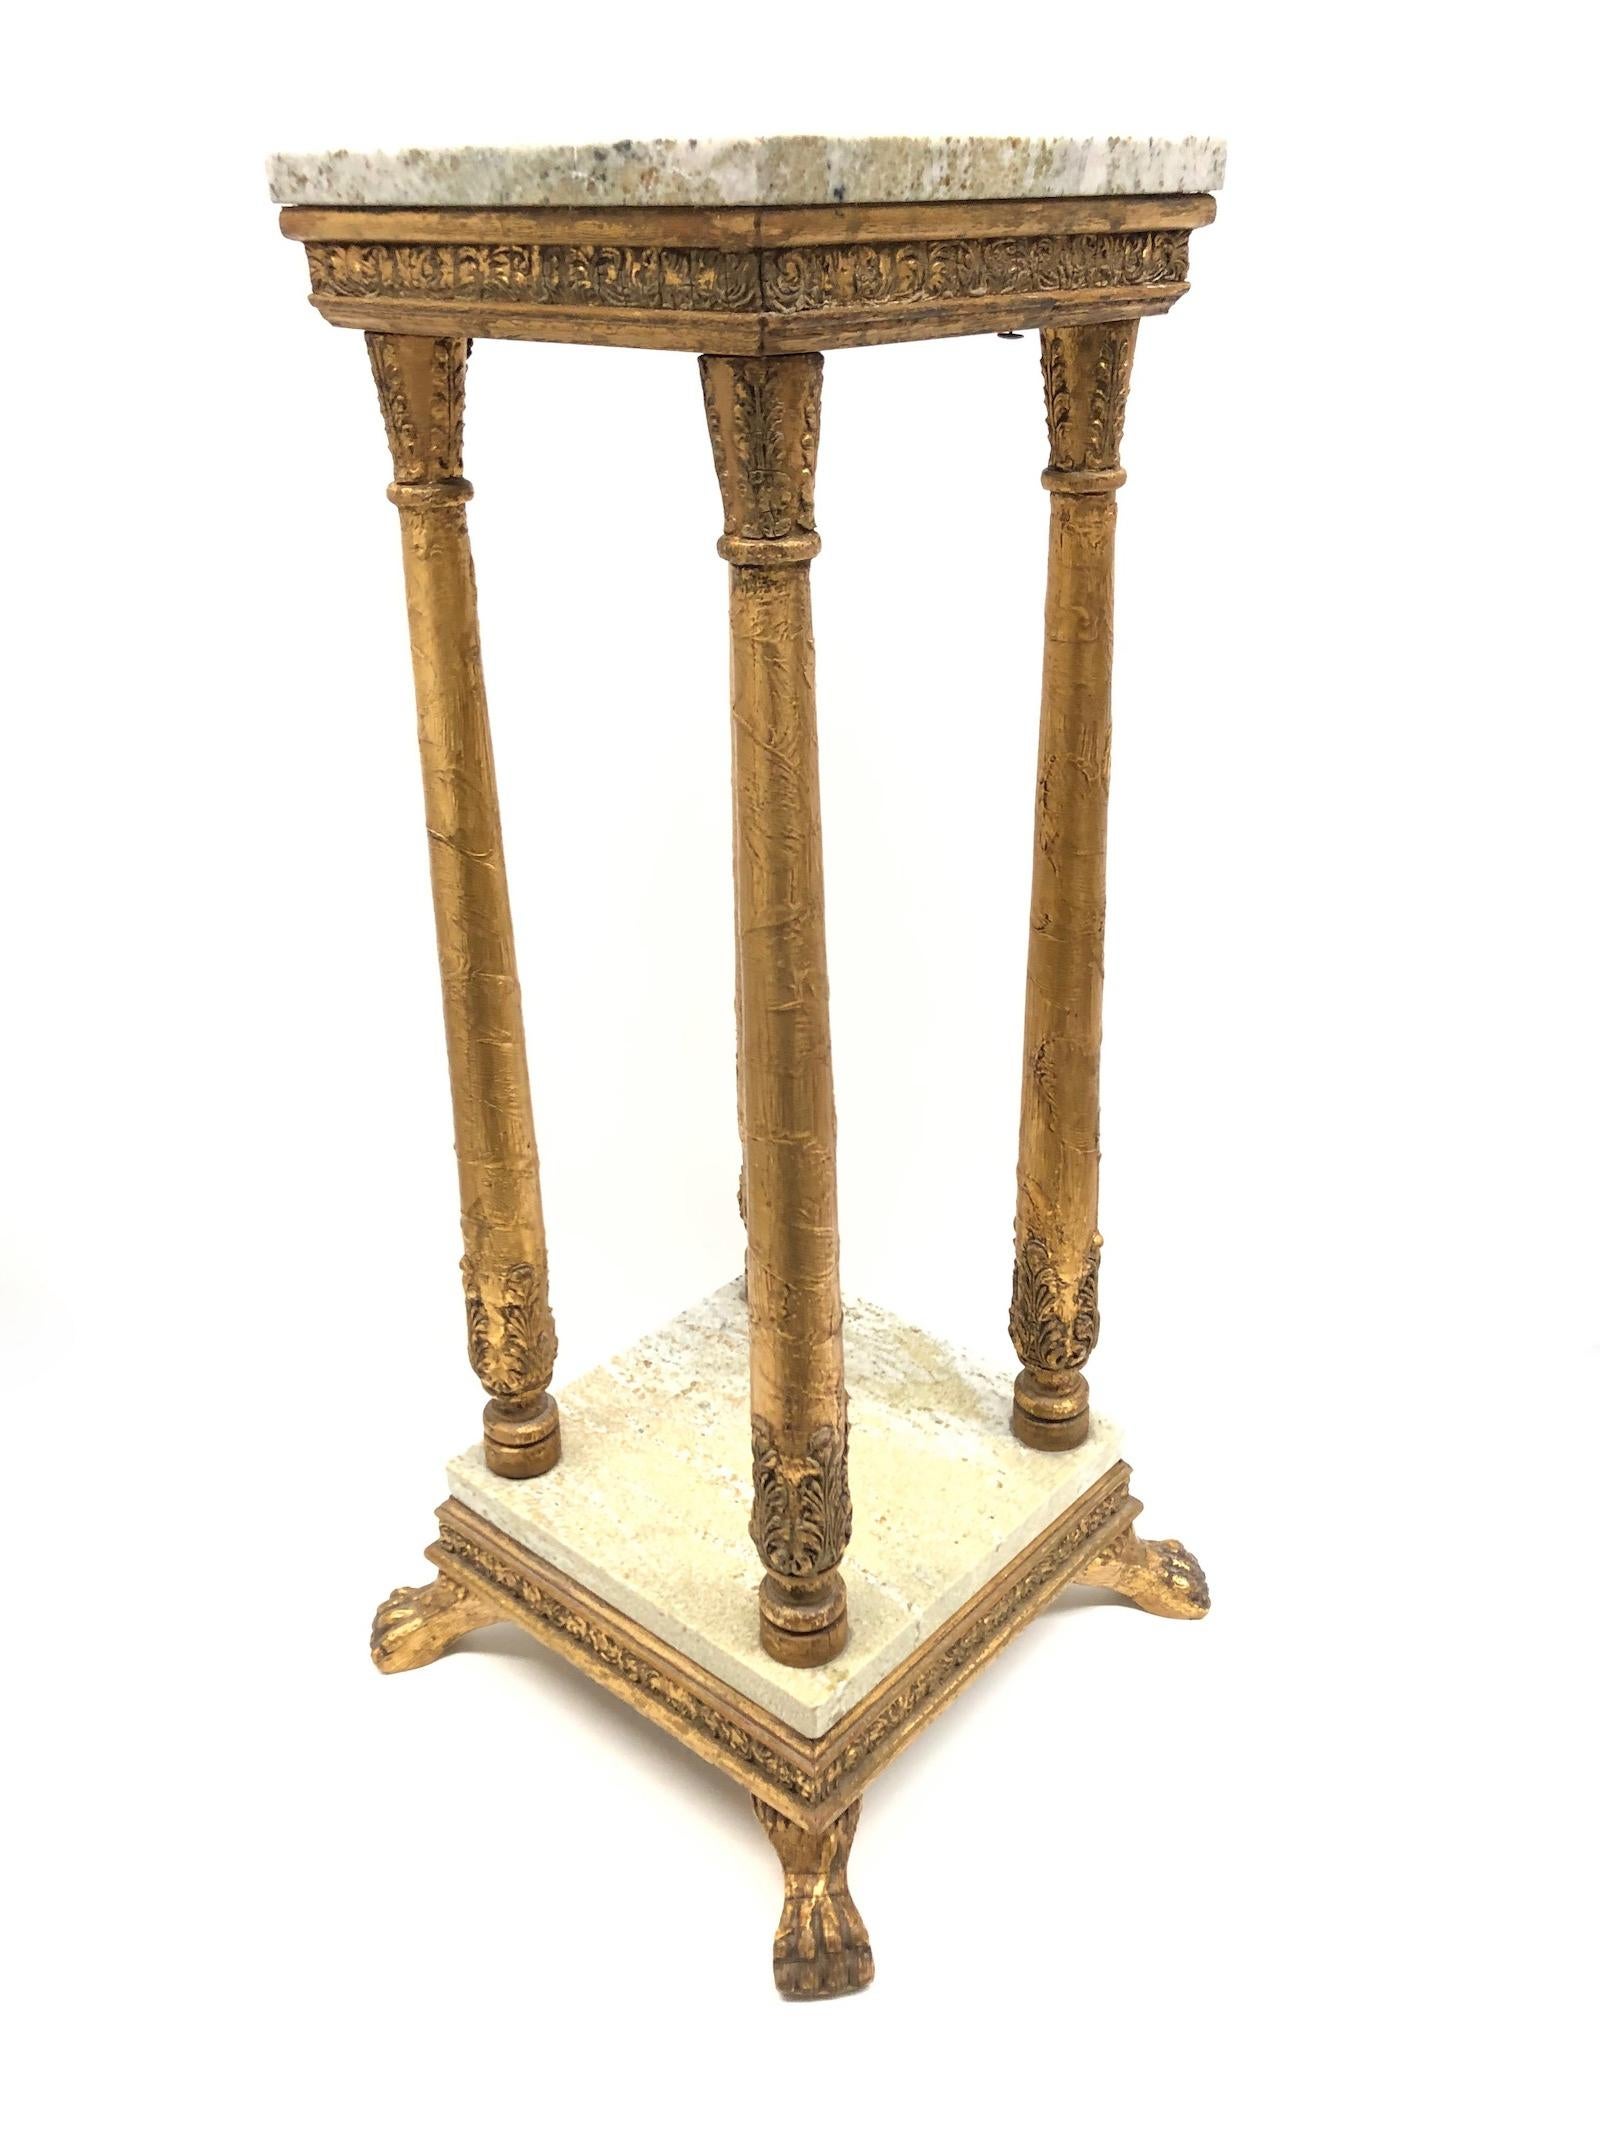 Hollywood Regency Late 19th Century Carved Gilt wood Tole ware Console Pedestal Table German